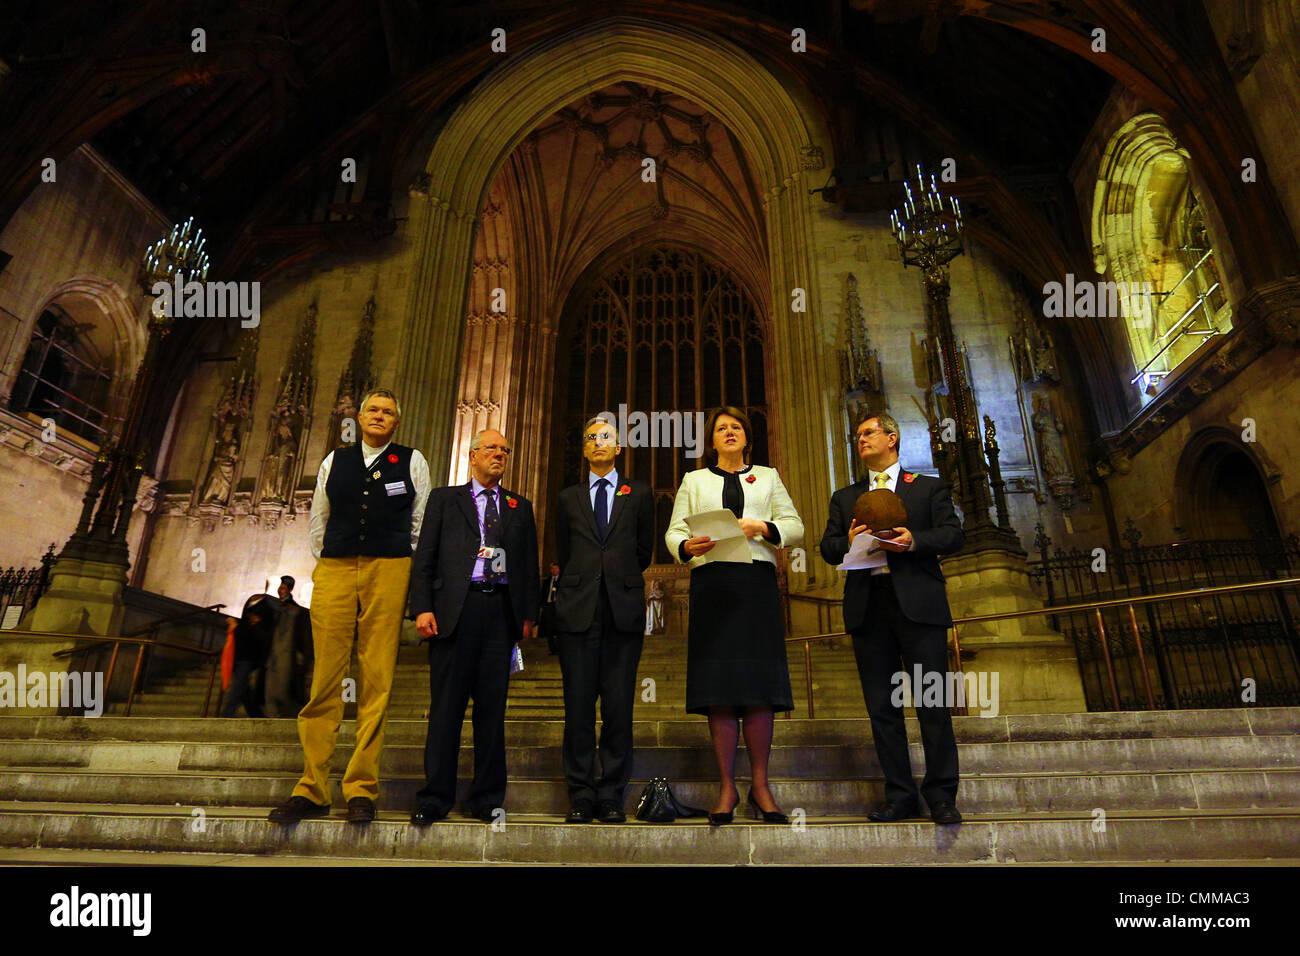 London, UK. 5th November 2013. Photographer Mike St. Maur Sheil, Lord Faulkner of Worcester, Dr. Andrew Murrison MP, Rt Hon Maria Miller MP - Secretary of State for Culture, Media and Sport and the Rt Hon Jeffrey Donaldson MP at the Fields of Battle Lands of Peace 14-18 pre-launch exhibition at Westminster Hall, Houses of Parliament, London. Announcing a major commemorative WWI exhibition by World Press Photo Award-winning photographer Mike St. Maur Sheil which will launch in London in 2014 and tour English towns for the next four years. Credit:  Paul Brown/Alamy Live News Stock Photo